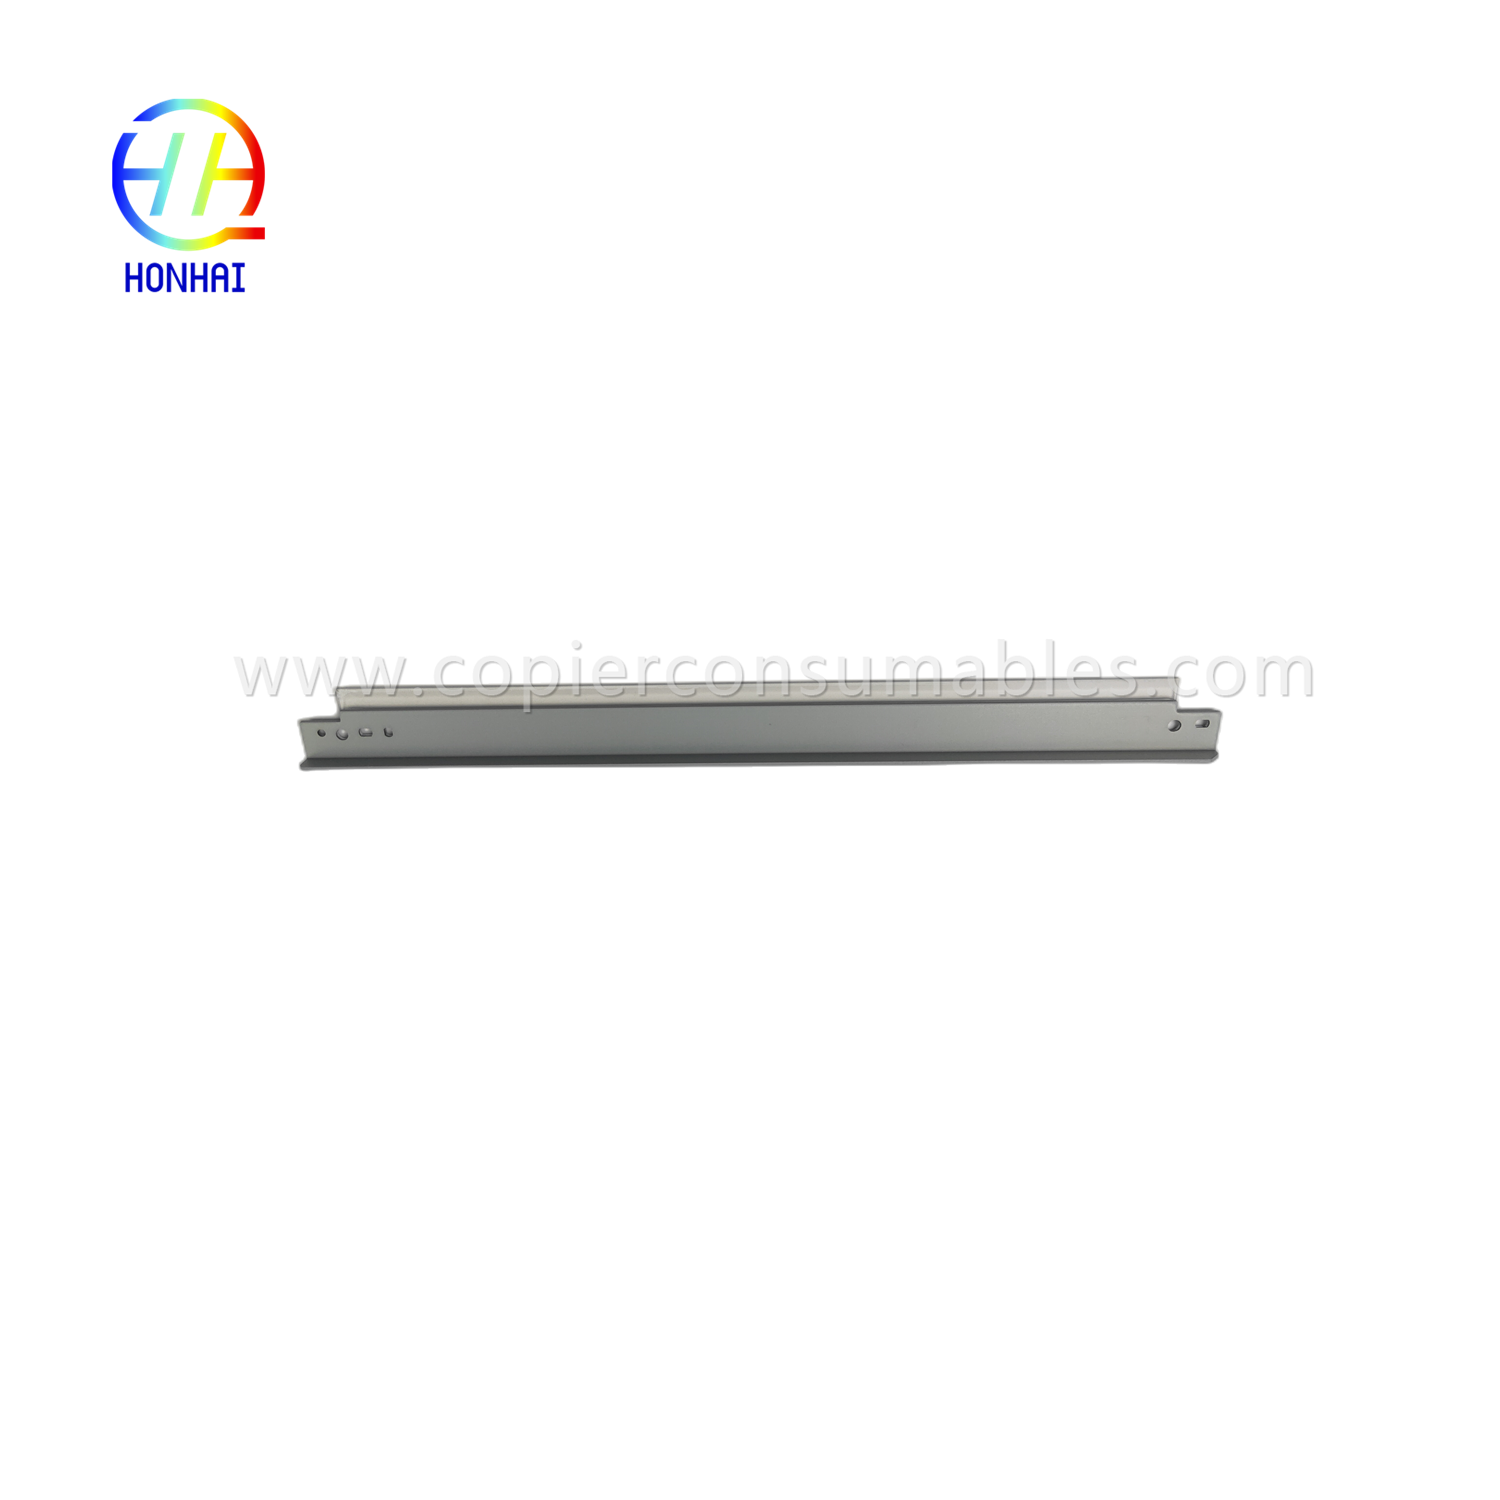 https://c585.goodo.net/drum-cleaning-blade-for-canon-ir-2520-2525-2535-2545-2530-2540-ምርት/